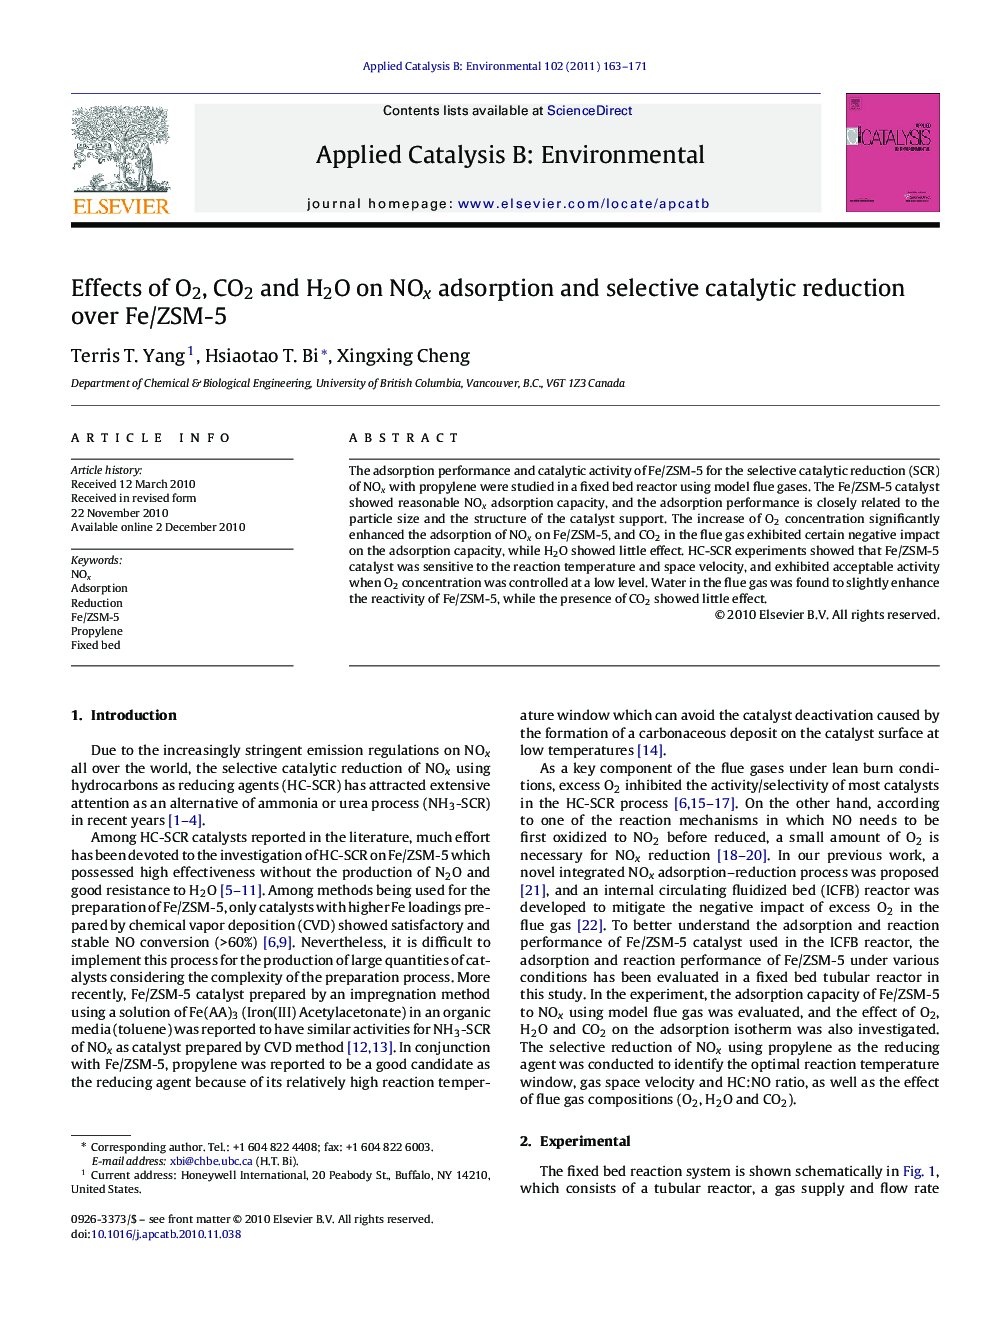 Effects of O2, CO2 and H2O on NOx adsorption and selective catalytic reduction over Fe/ZSM-5